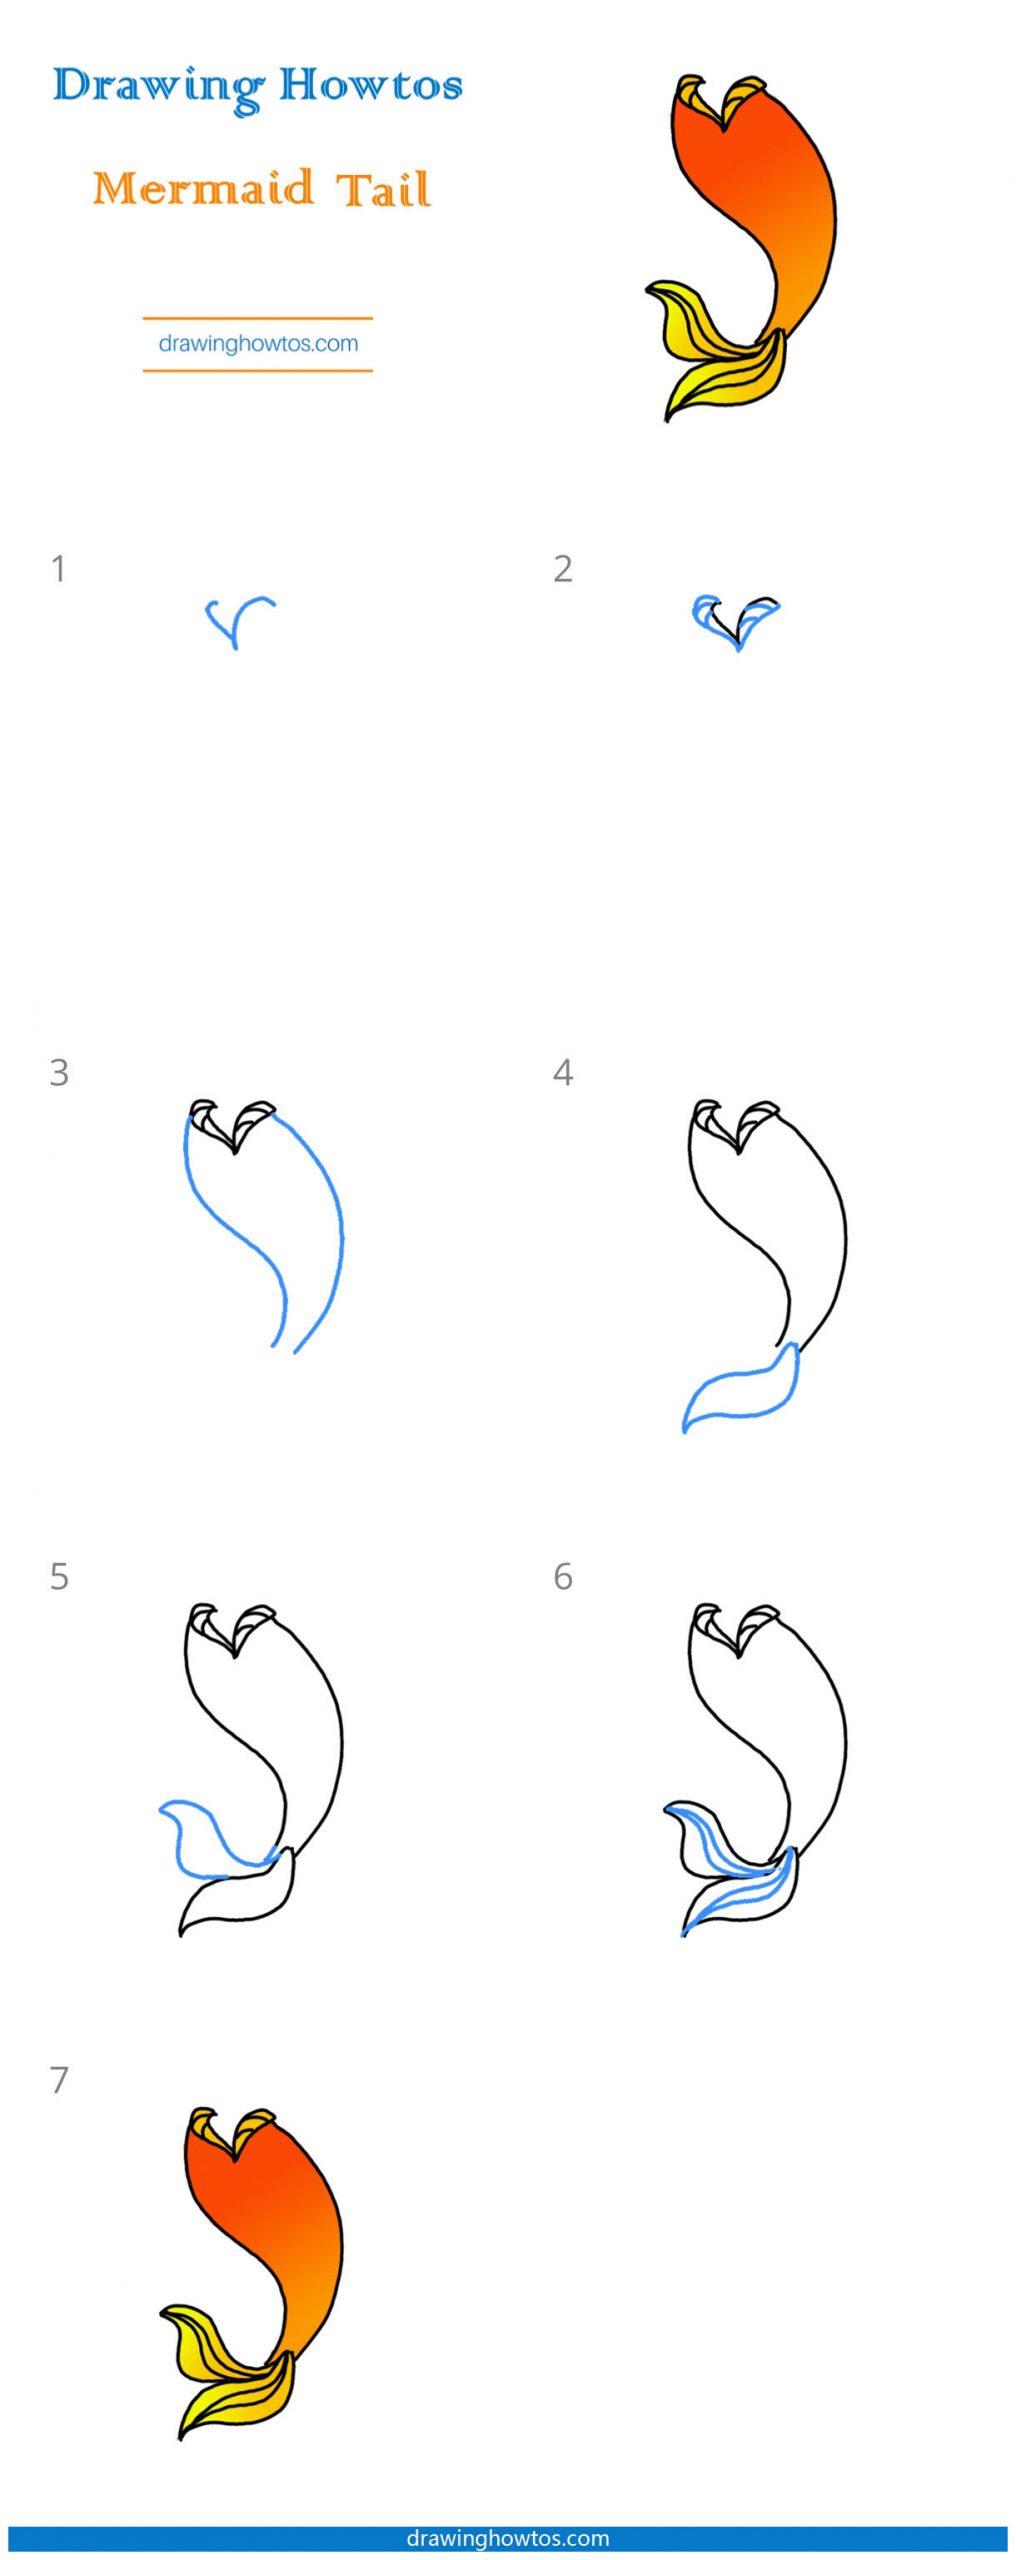 How to Draw a Mermaid Tail - Step by Step Easy Drawing Guides - Drawing